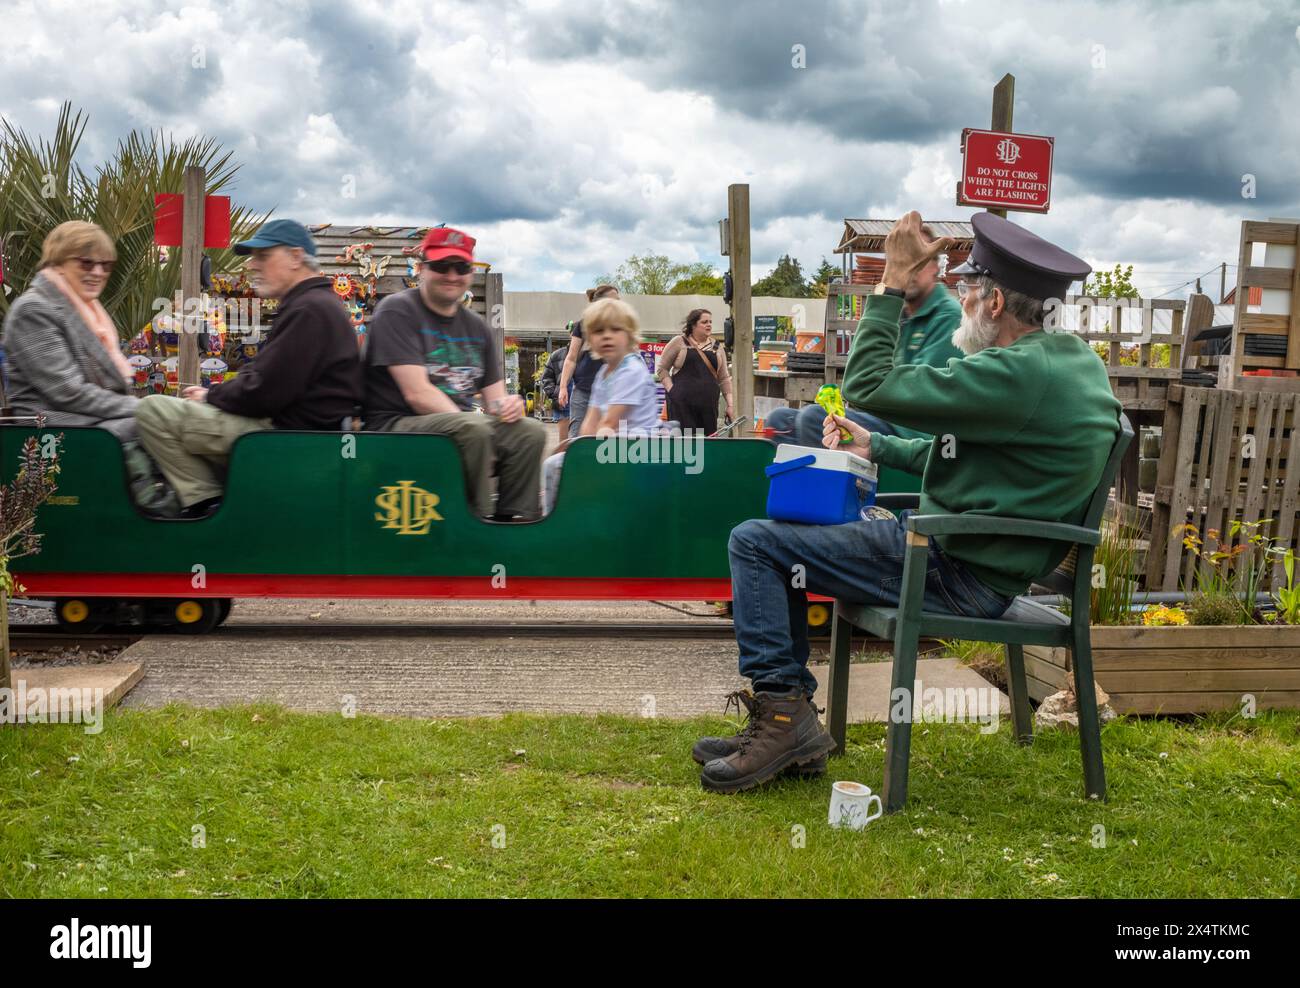 A volunteer guard waves at passengers on the The Railway Mission minature steam locomotive and carriages at South Downs Light Railway, Pulborough, UK Stock Photo